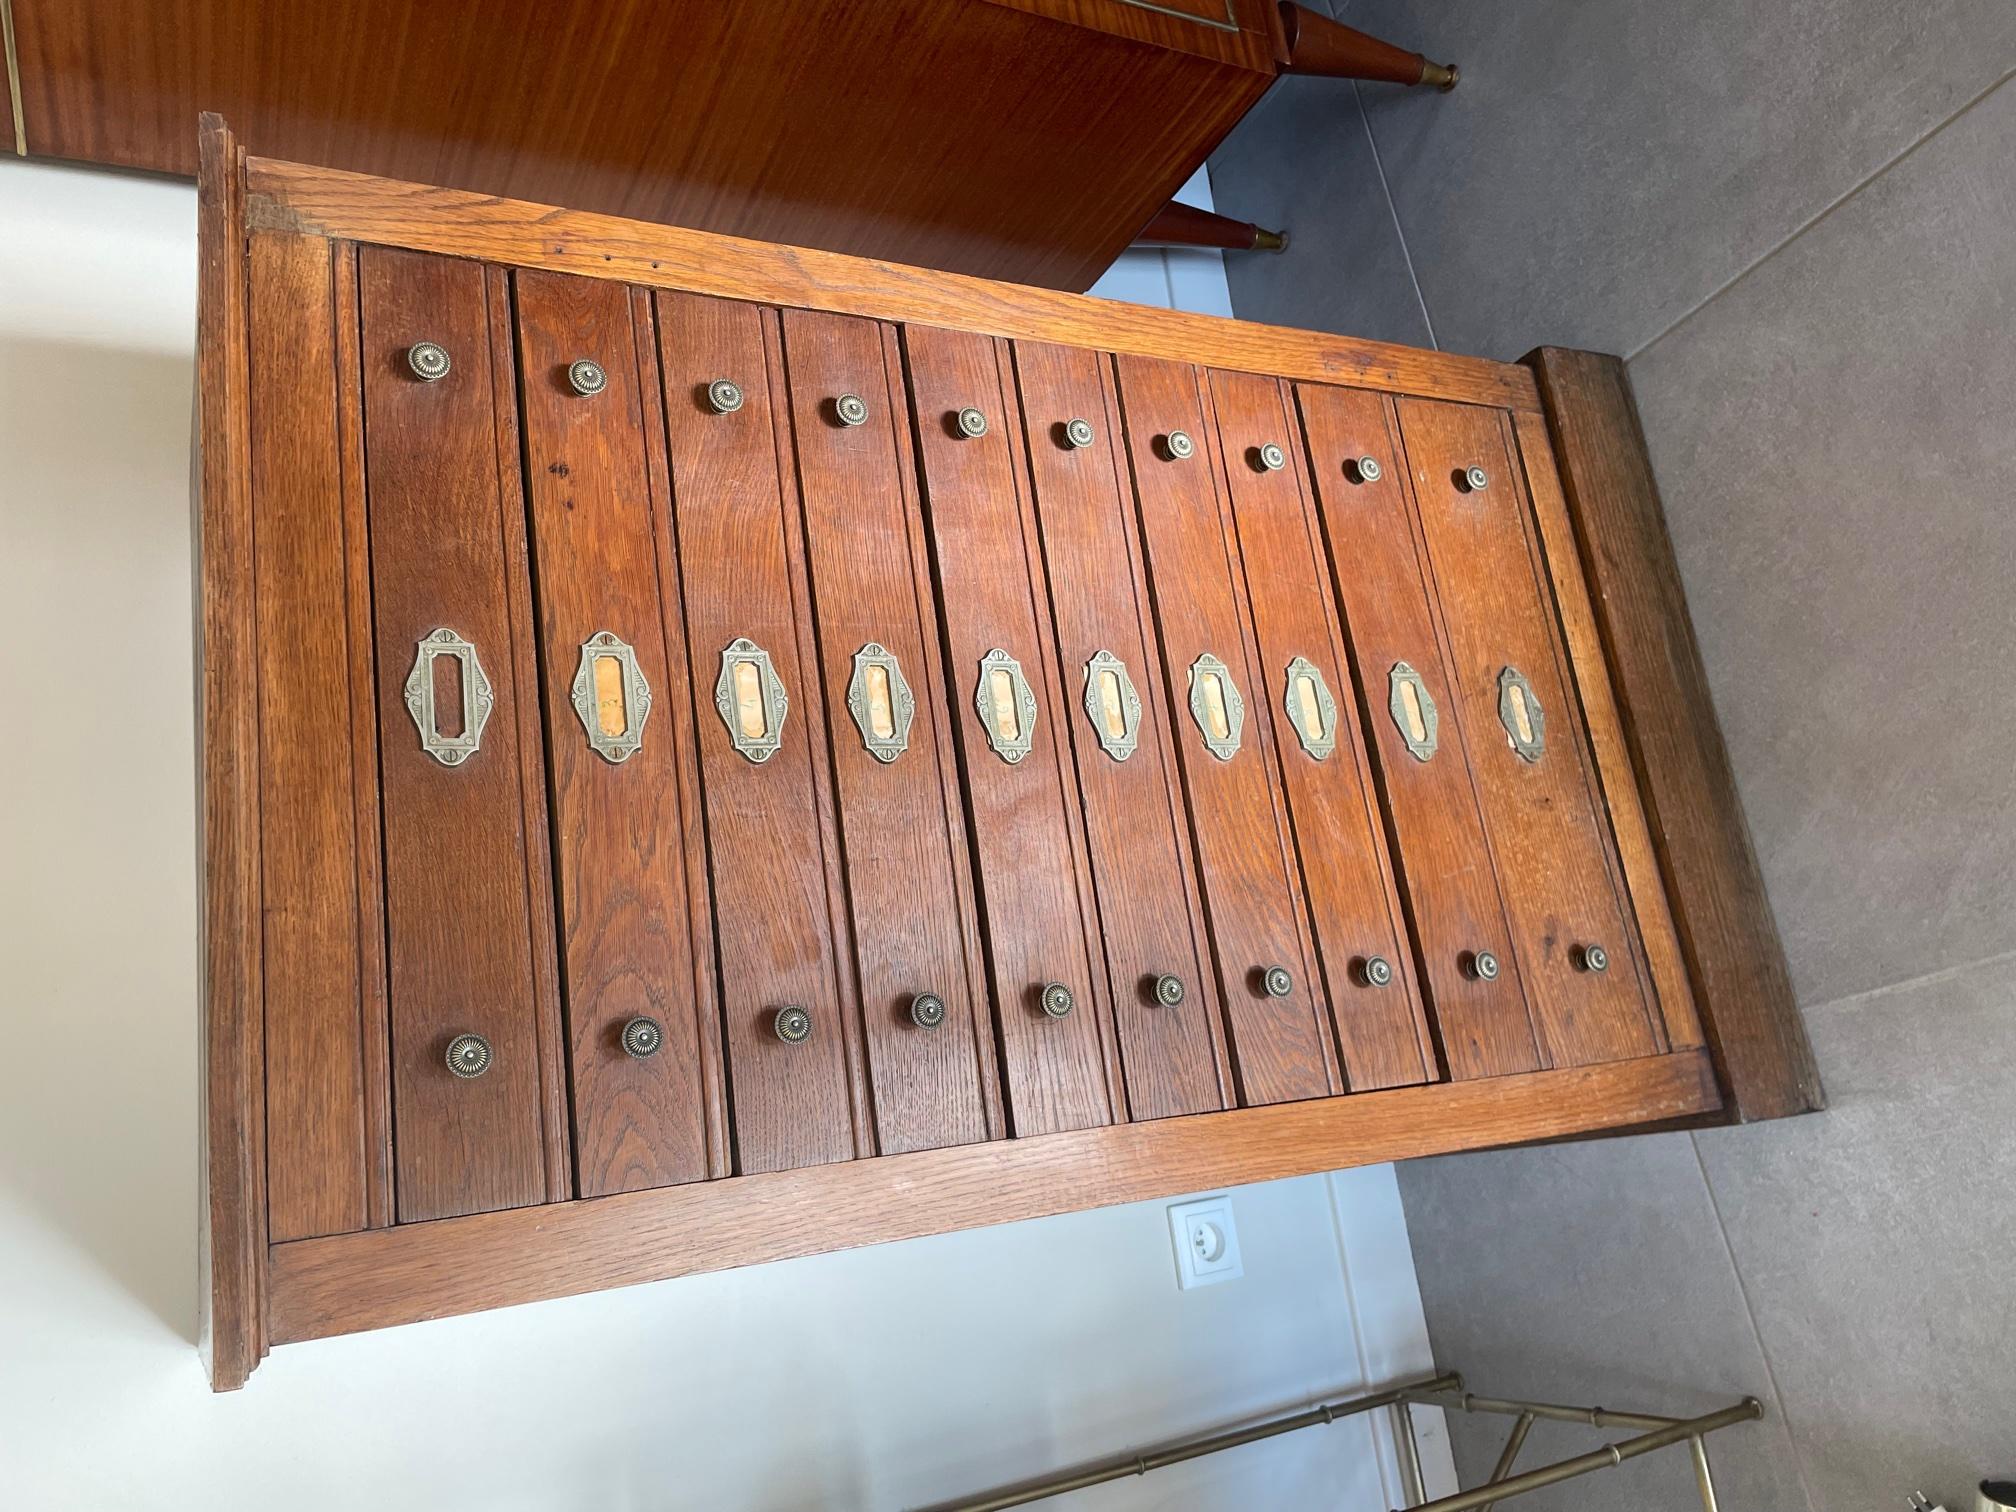 Very nice 20th century French oak and brass handles chests of drawers from the 1900s. 
Original metal Label holder. 
Good quality and condition. 
Use to be in a print company.